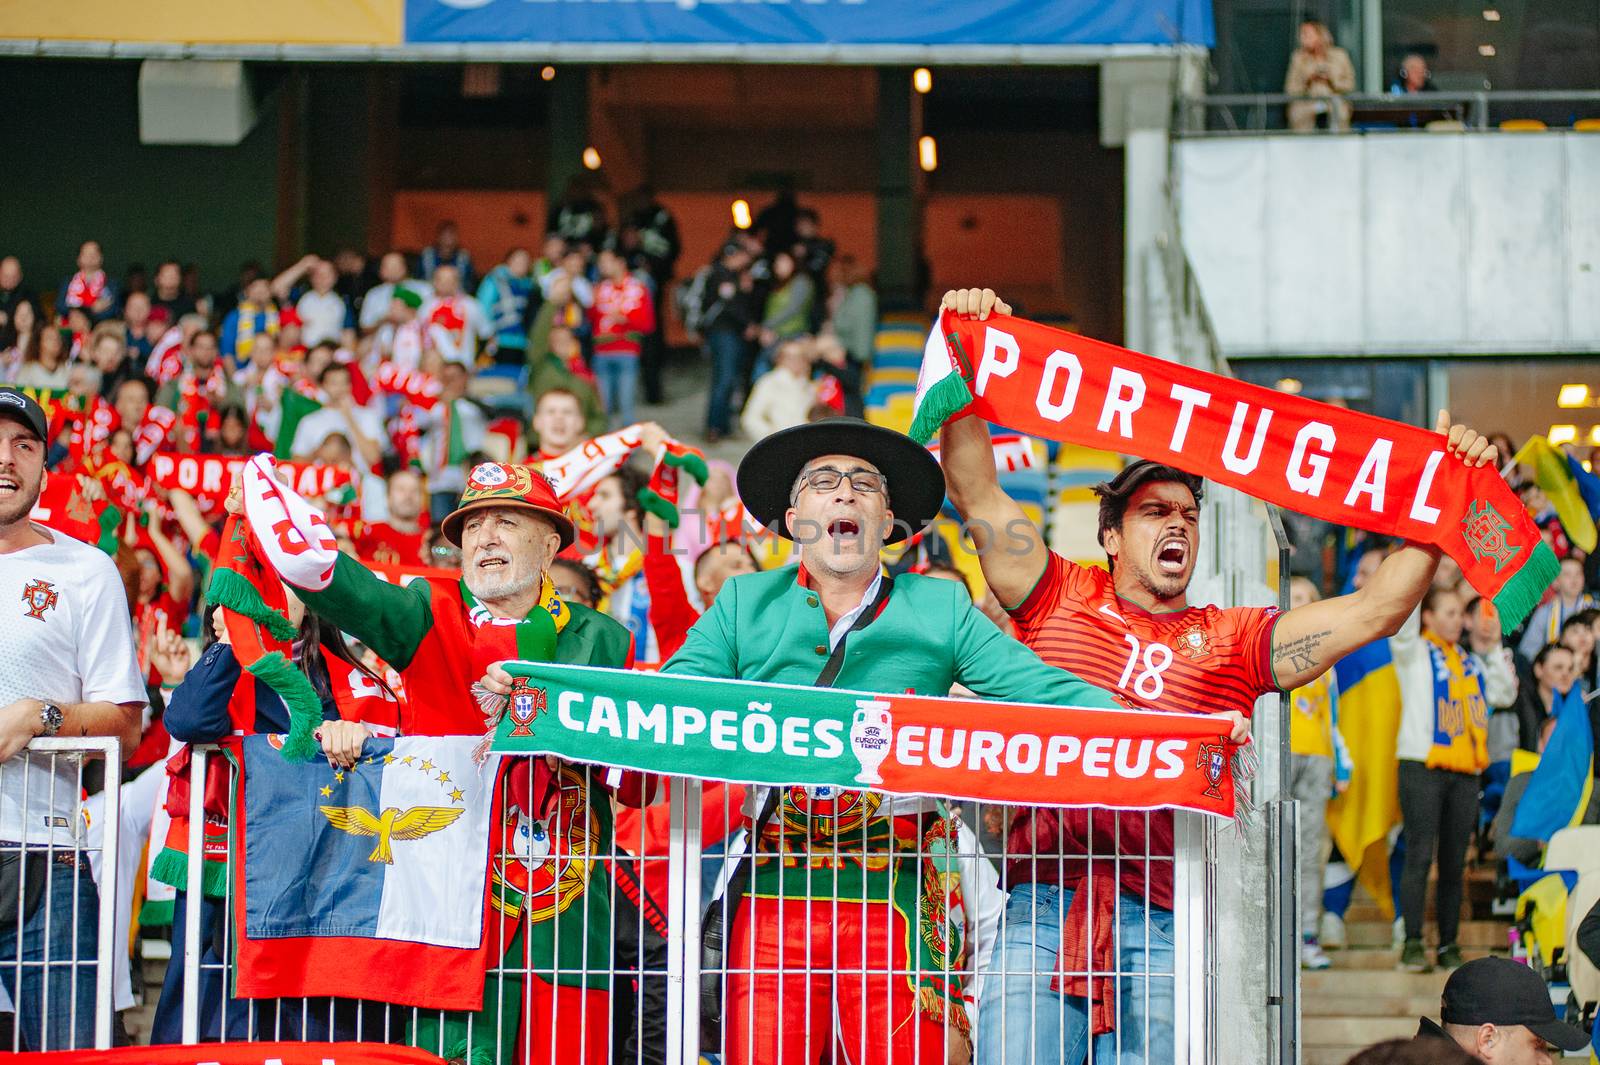 Kyiv, Ukraine - October 14, 2019: Portuguese fan support the team in the stands during the UEFA EURO 2020 qualifying match